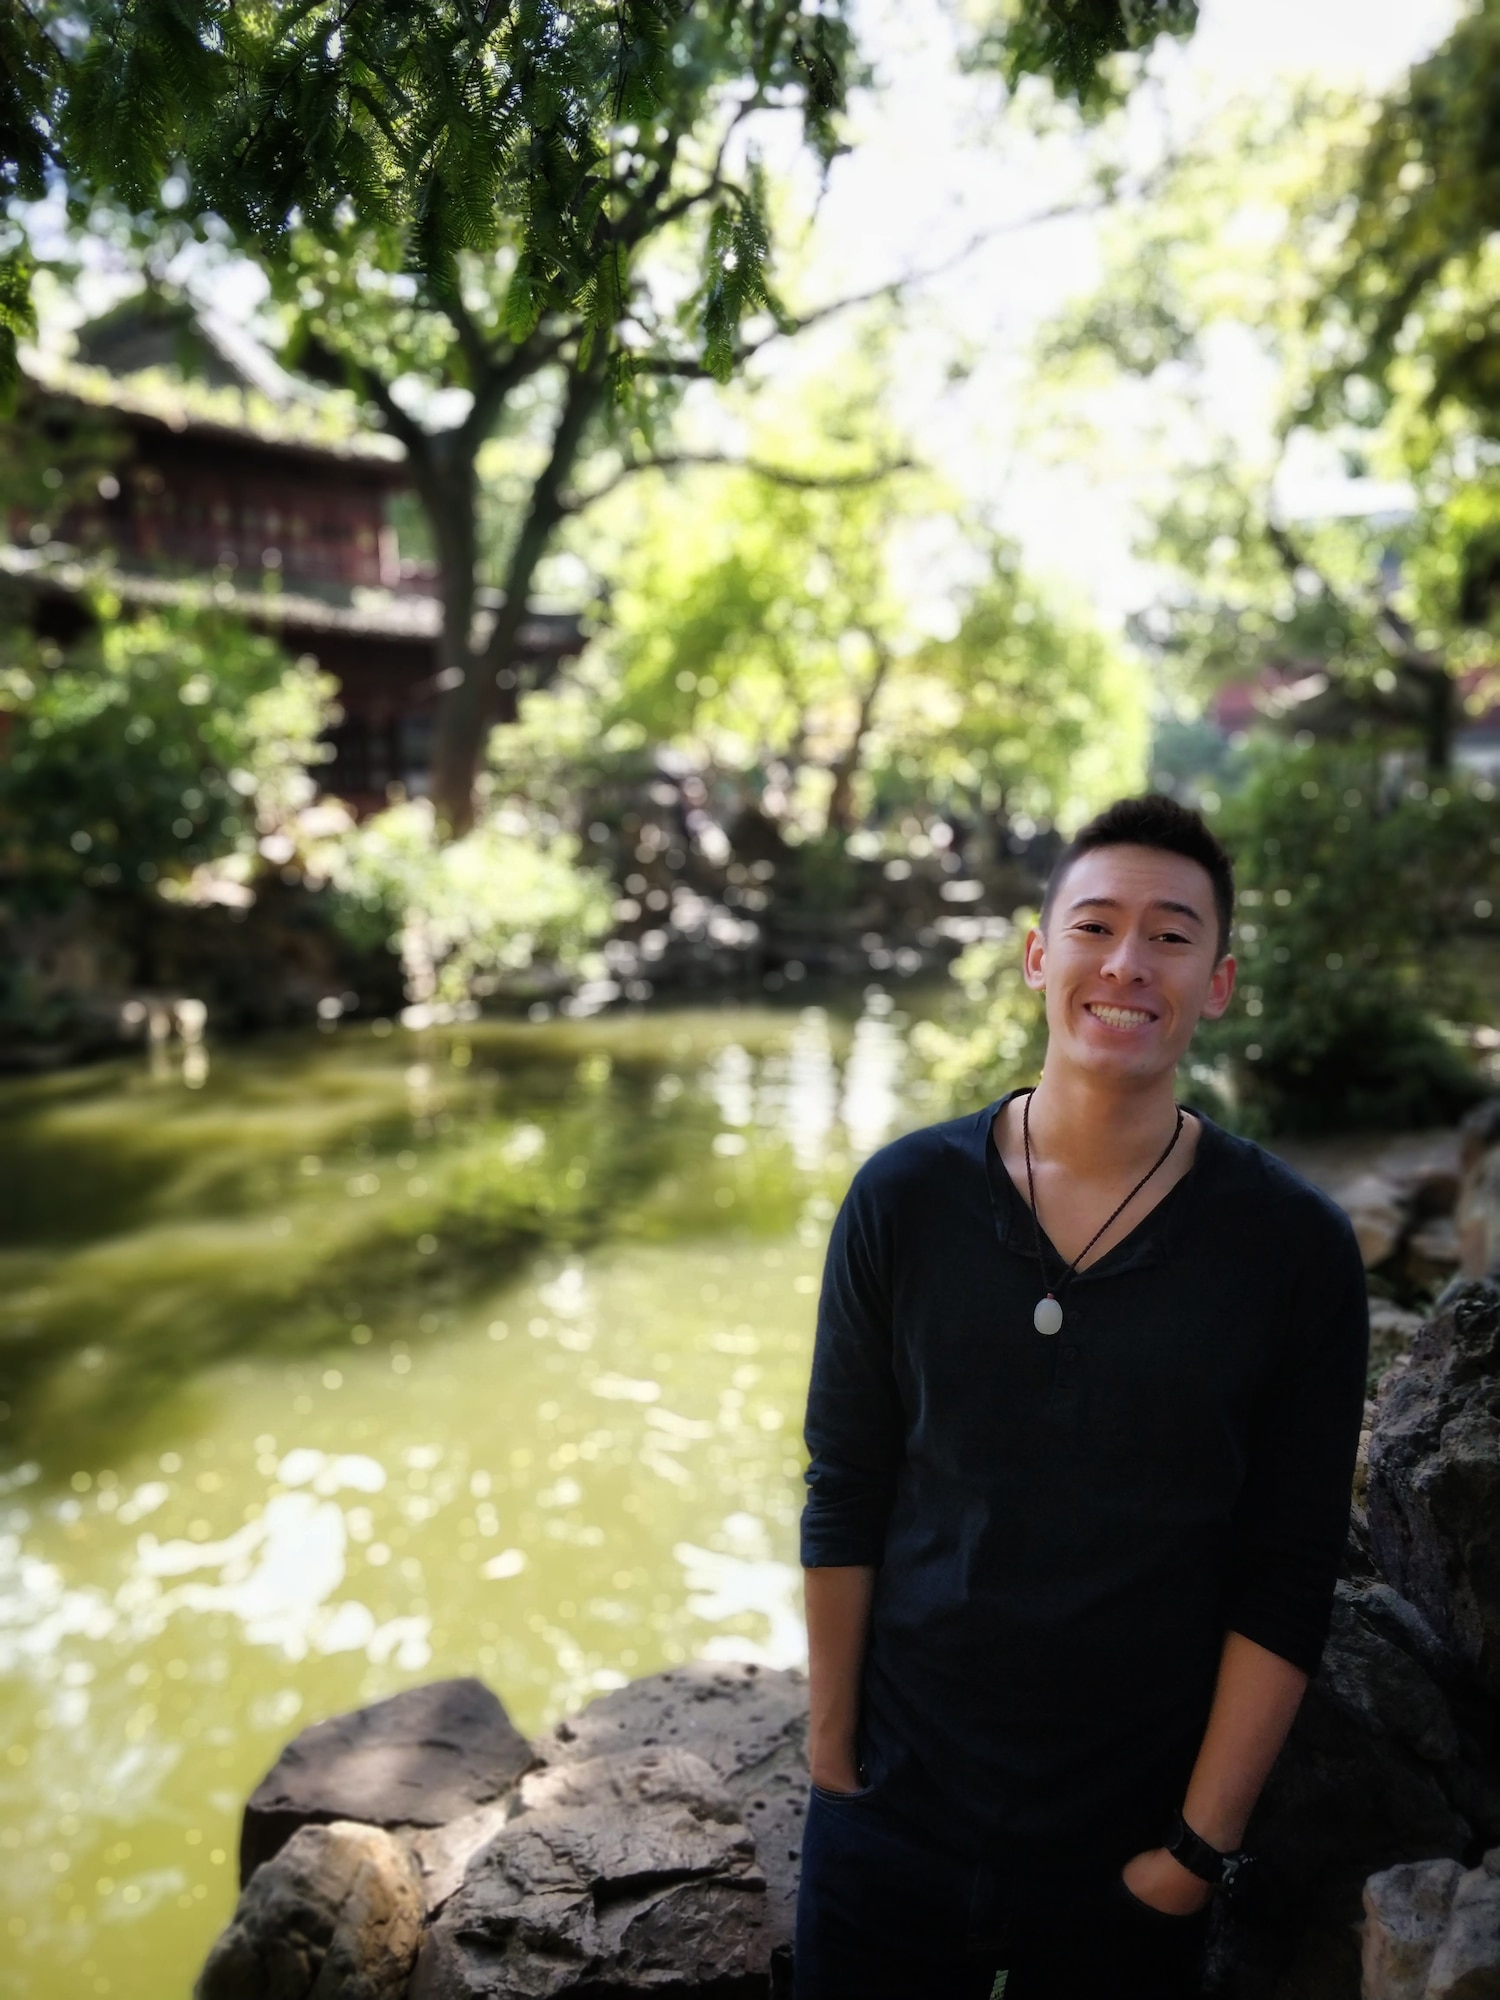 During his Language Intensive Training Event in Shanghai, LEAP Scholar Capt. Wiiliam Watson visited the Yu Yuan (Garden of Peace and Comfort). It was originally built in the later 1500s during the Ming Dynasty, and now exists as a classical garden in the middle of the Shanghai urban sprawl. (Courtesy Photo)